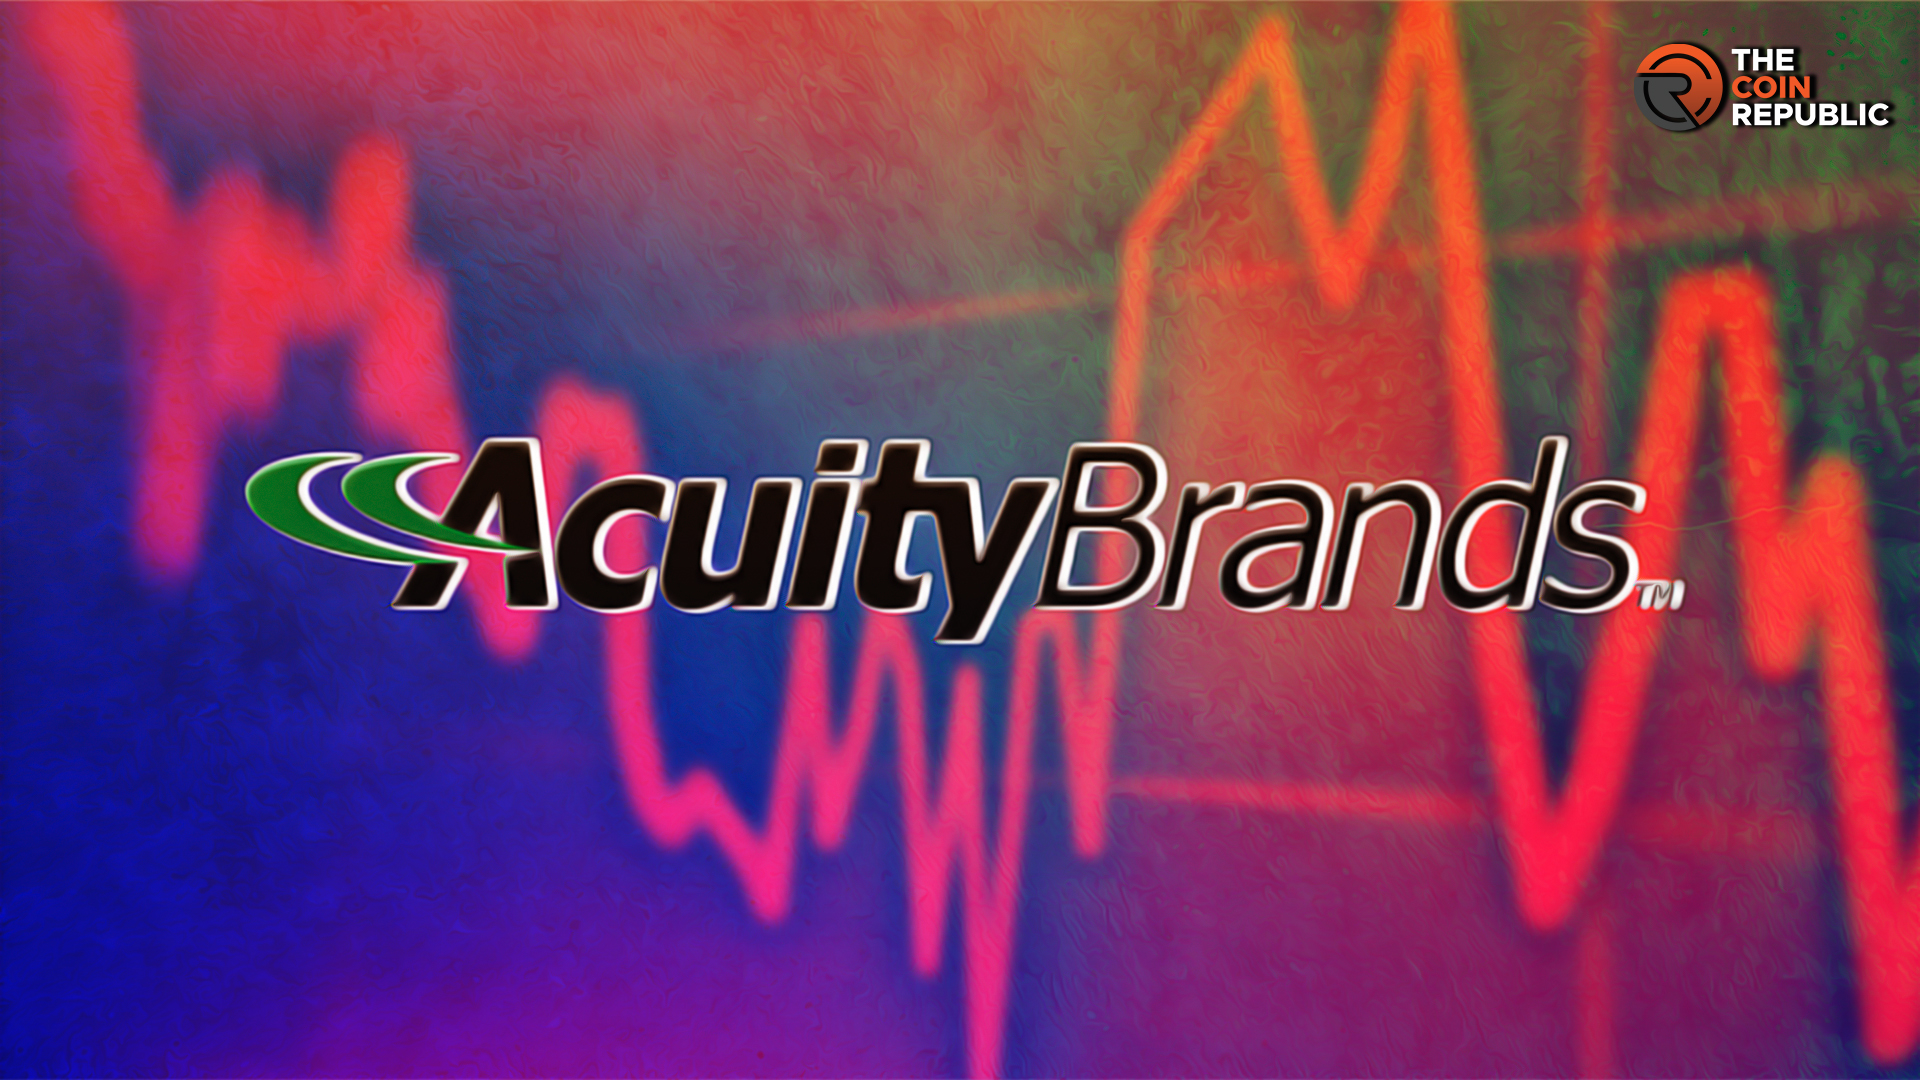 Acuity Brands (AYI) Stock: Why Did AYI Stock Price Shoot Up?